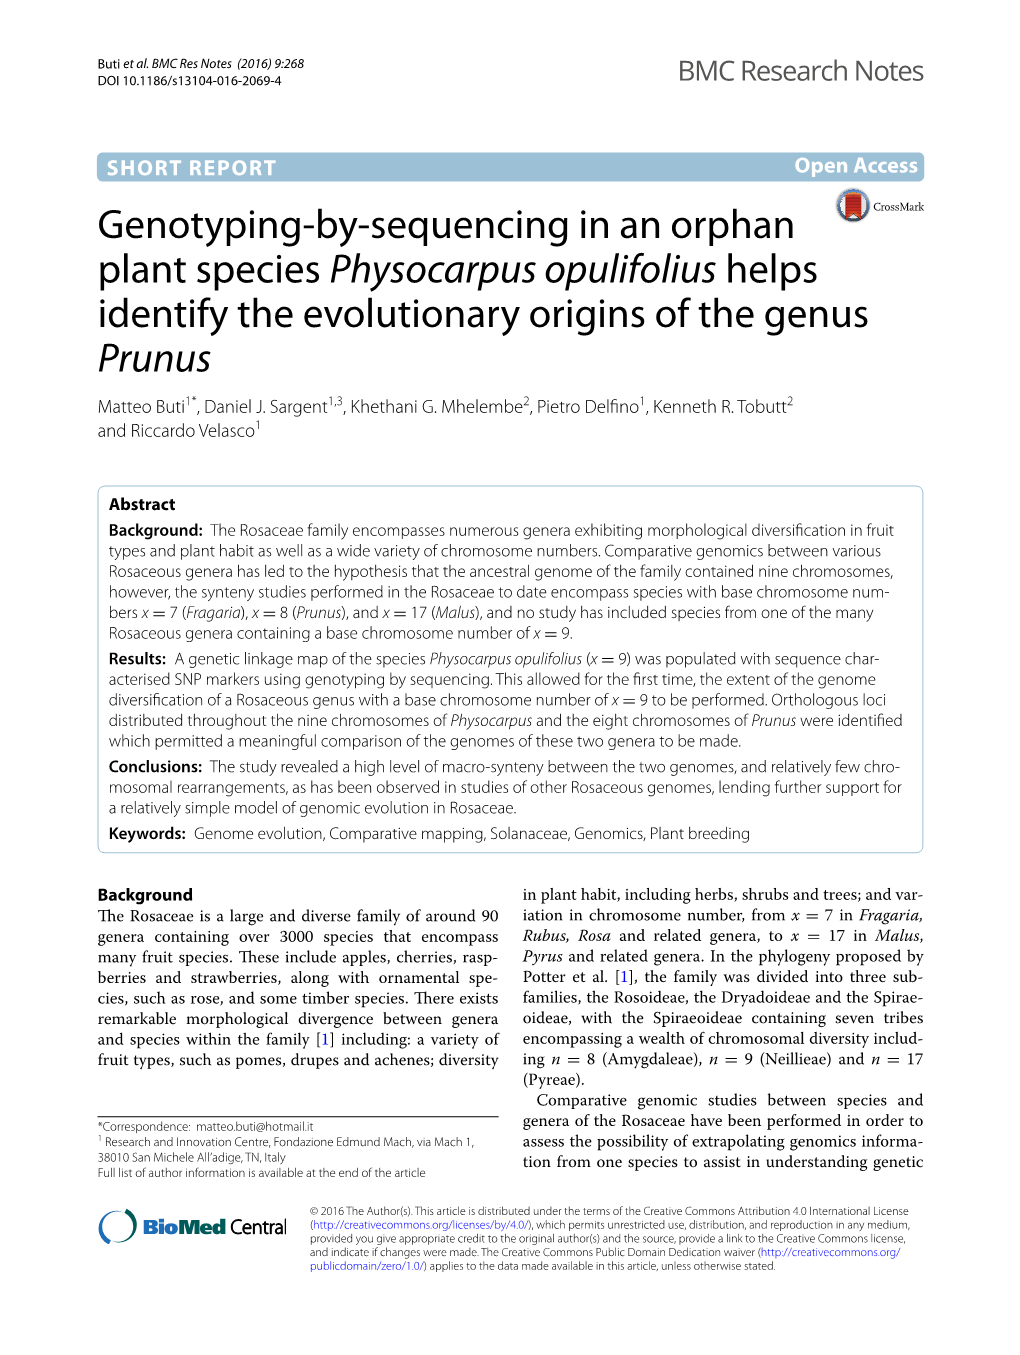 Genotyping-By-Sequencing in an Orphan Plant Species Physocarpus Opulifolius Helps Identify the Evolutionary Origins of the Genus